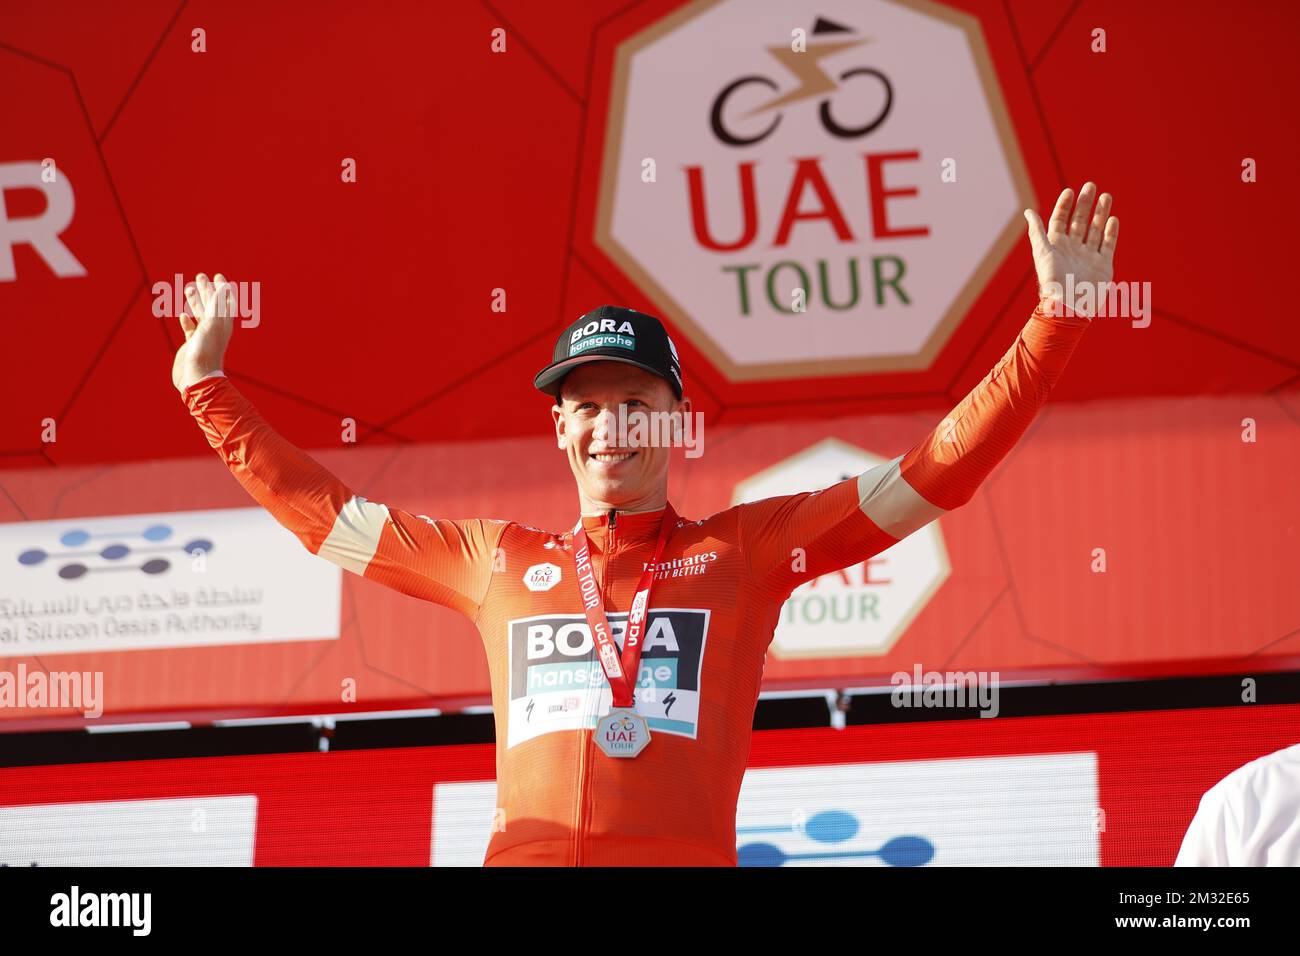 German Pascal Ackermann of Bora-Hansgrohe celebrates on the podium after winning stage 1 of the 'UAE Tour' 2020 cycling race 148km from Dubai The Pointe to Dubai Silicon Oasis in Dubai, United Arab Emirates, Sunday 23 February 2020. This year's edition is taking place from 23 February to 29 February. BELGA PHOTO YUZURU SUNADA FRANCE OUT Stock Photo